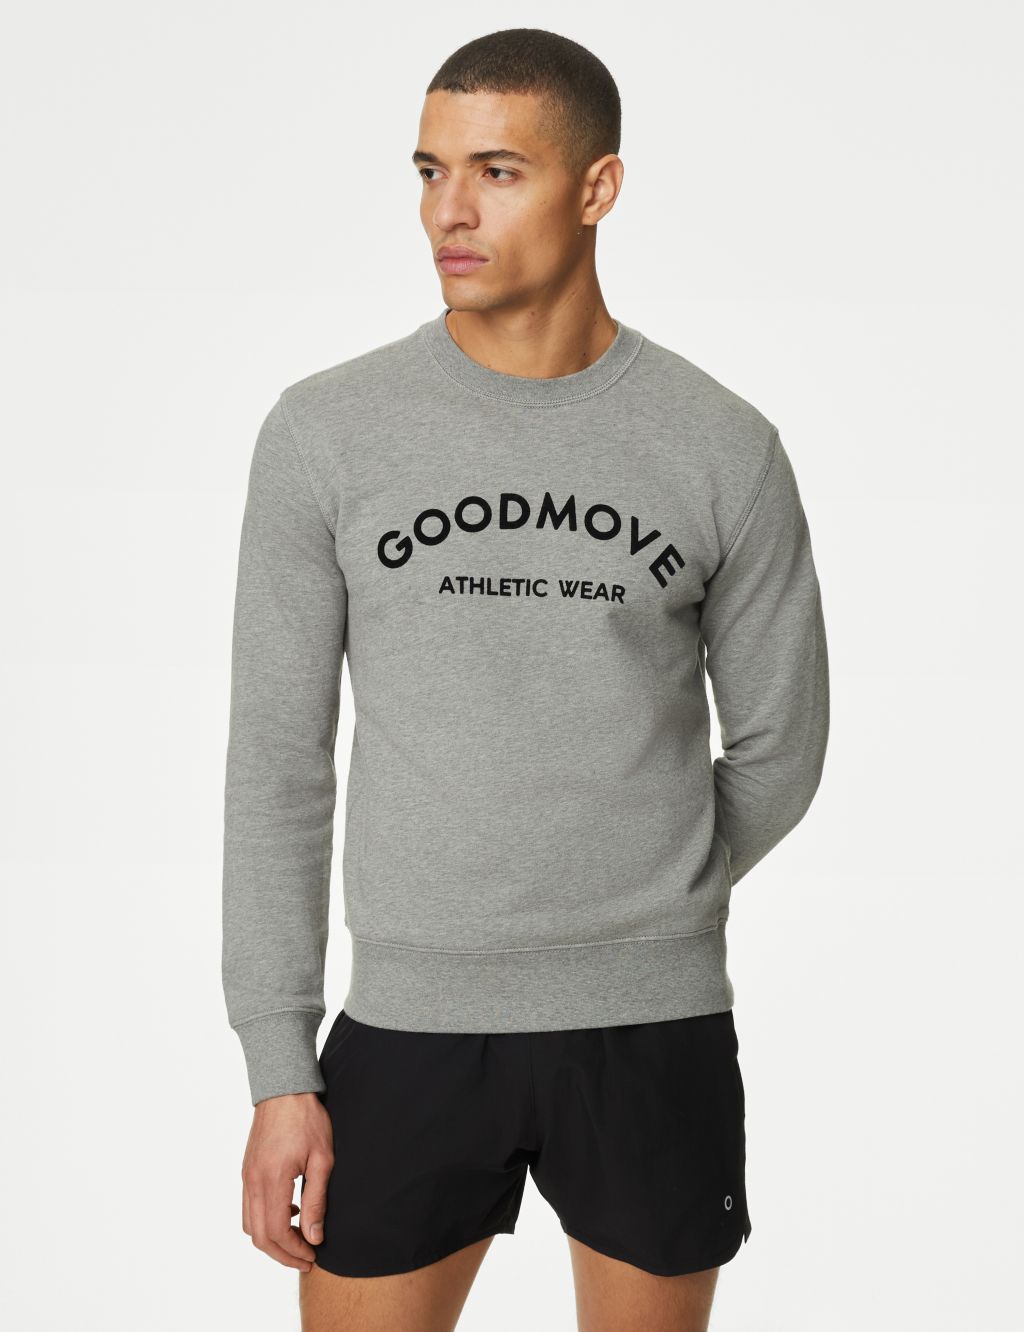 Marks and Spencer - Whatever your goal, crush it with Goodmove's